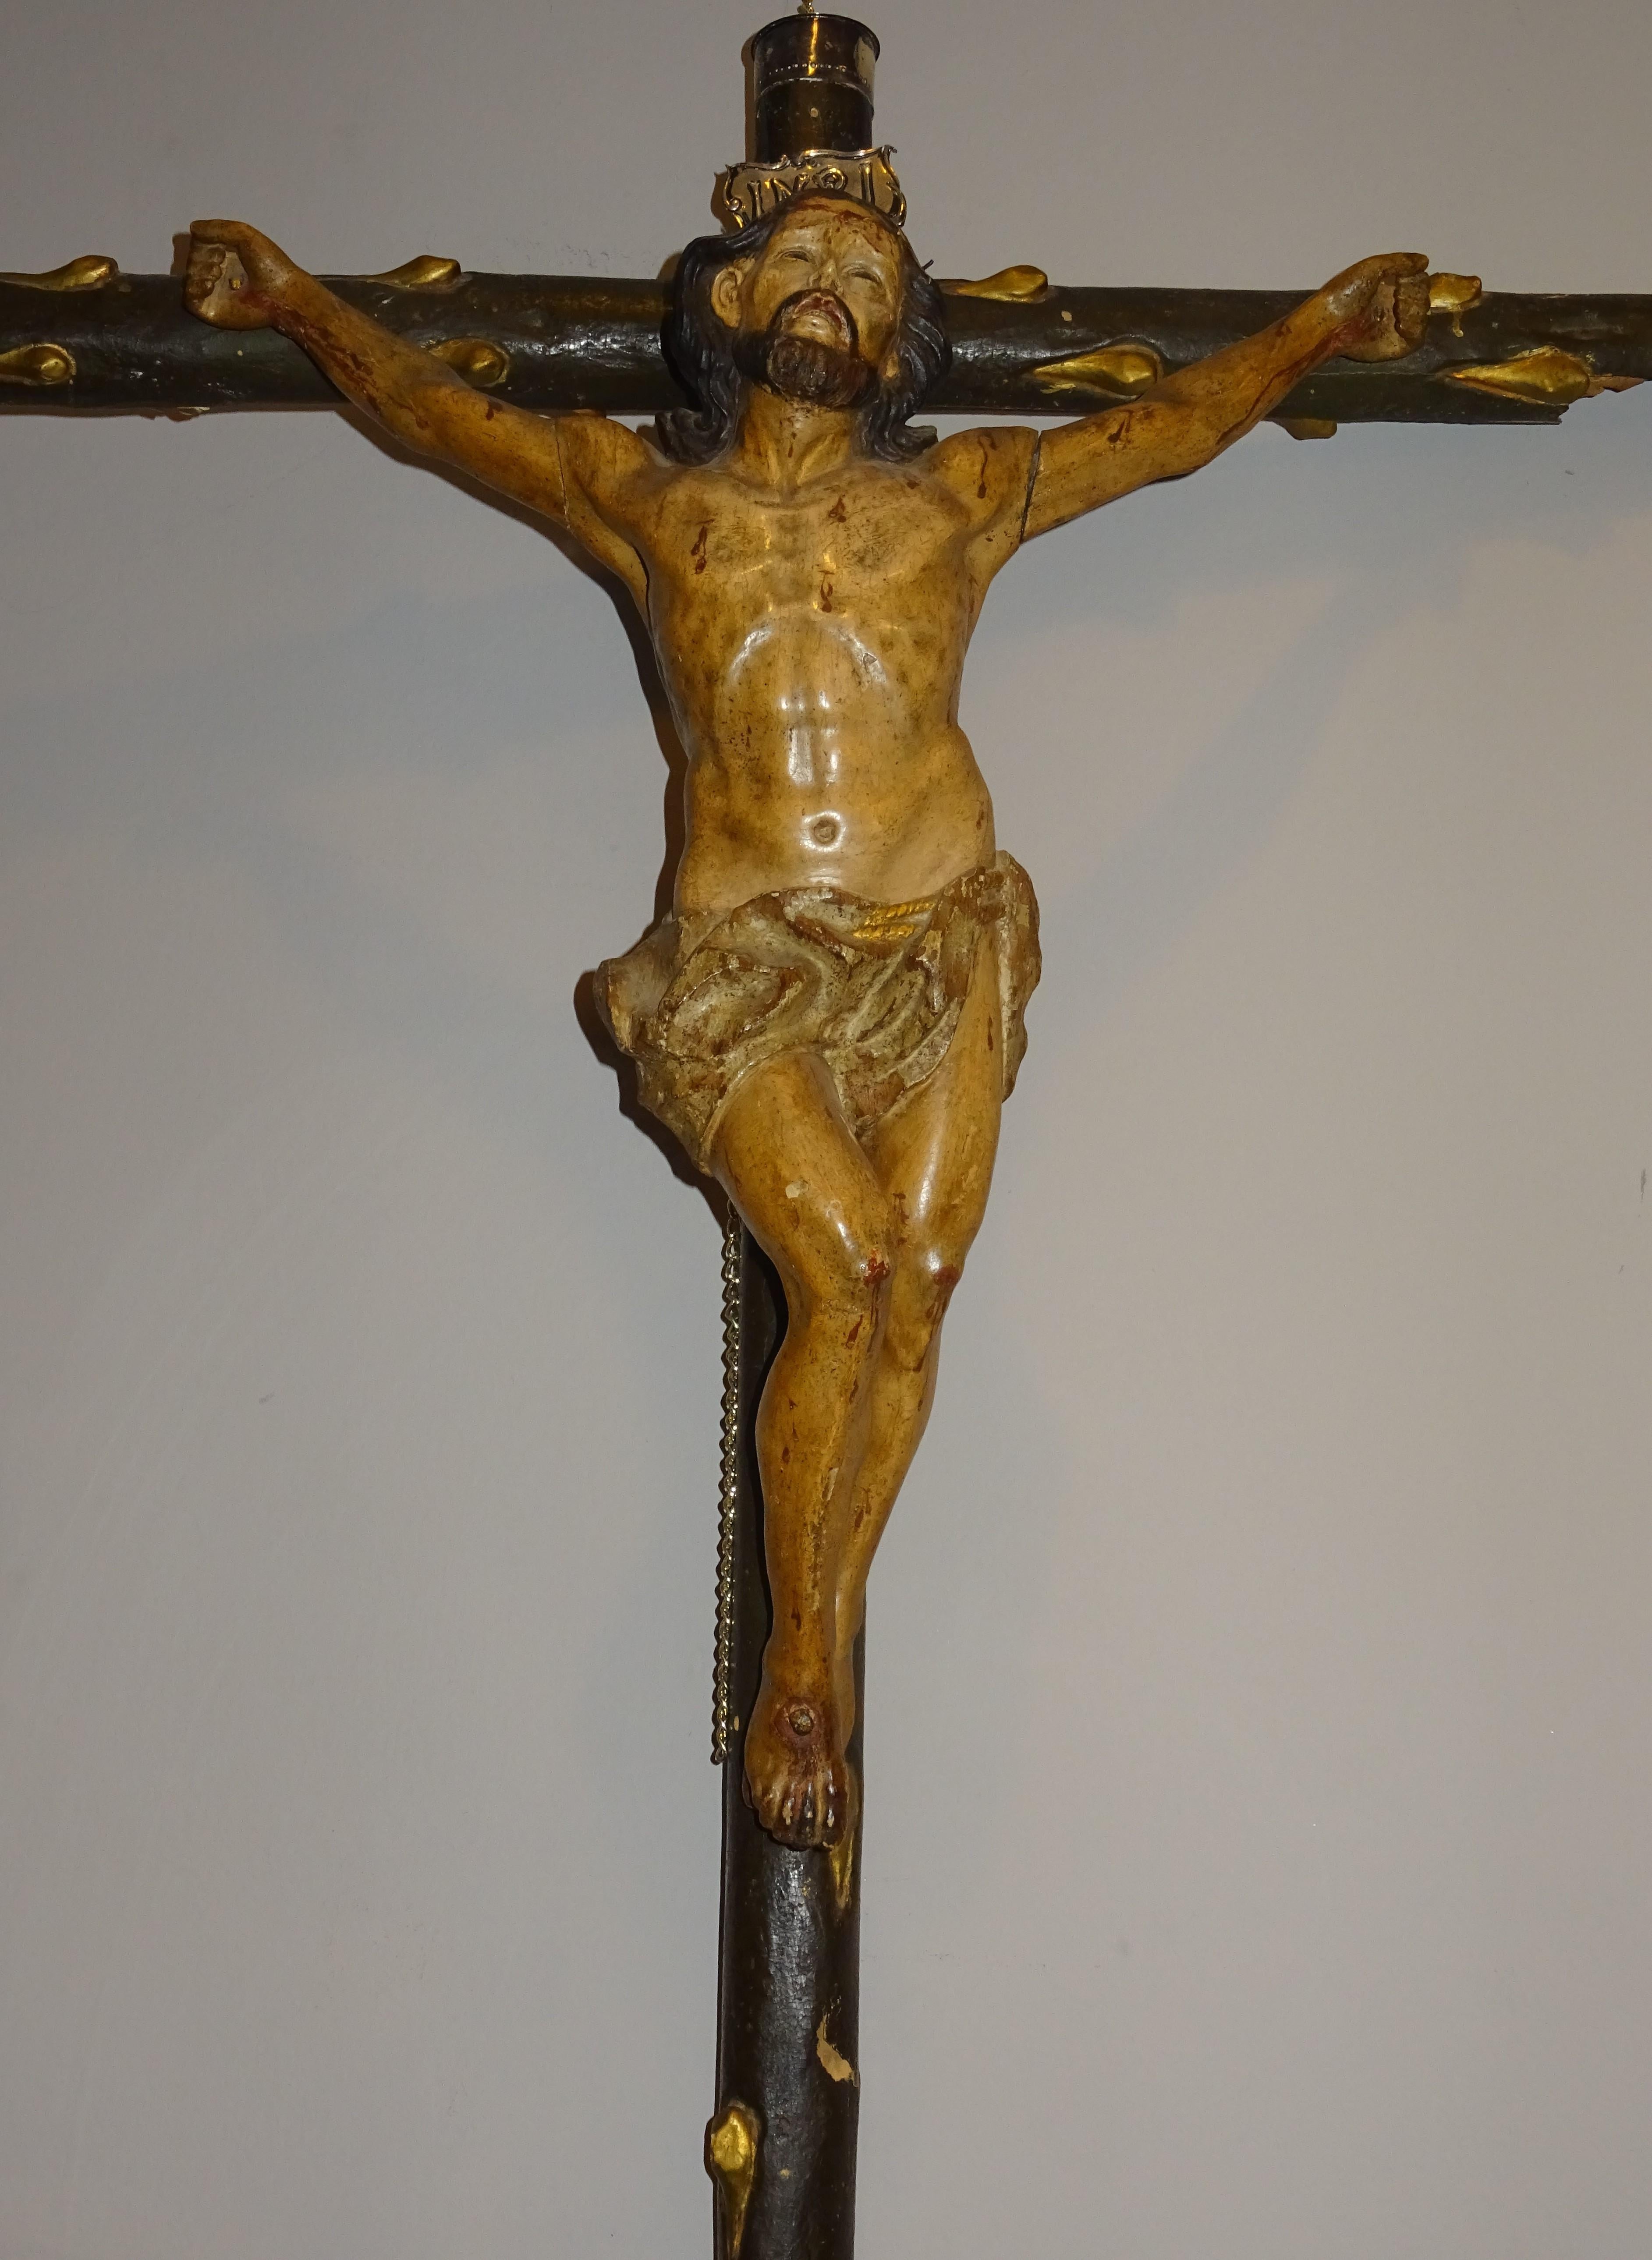 One of a kind sculpture of Crucified Christ in carved wood and crystal eyes (one of them its loose), 18th century Hispano Filipino School. The crown, inscription and finishes in silver.
A stunning sculpture of Crucified Christ with an extraordinary